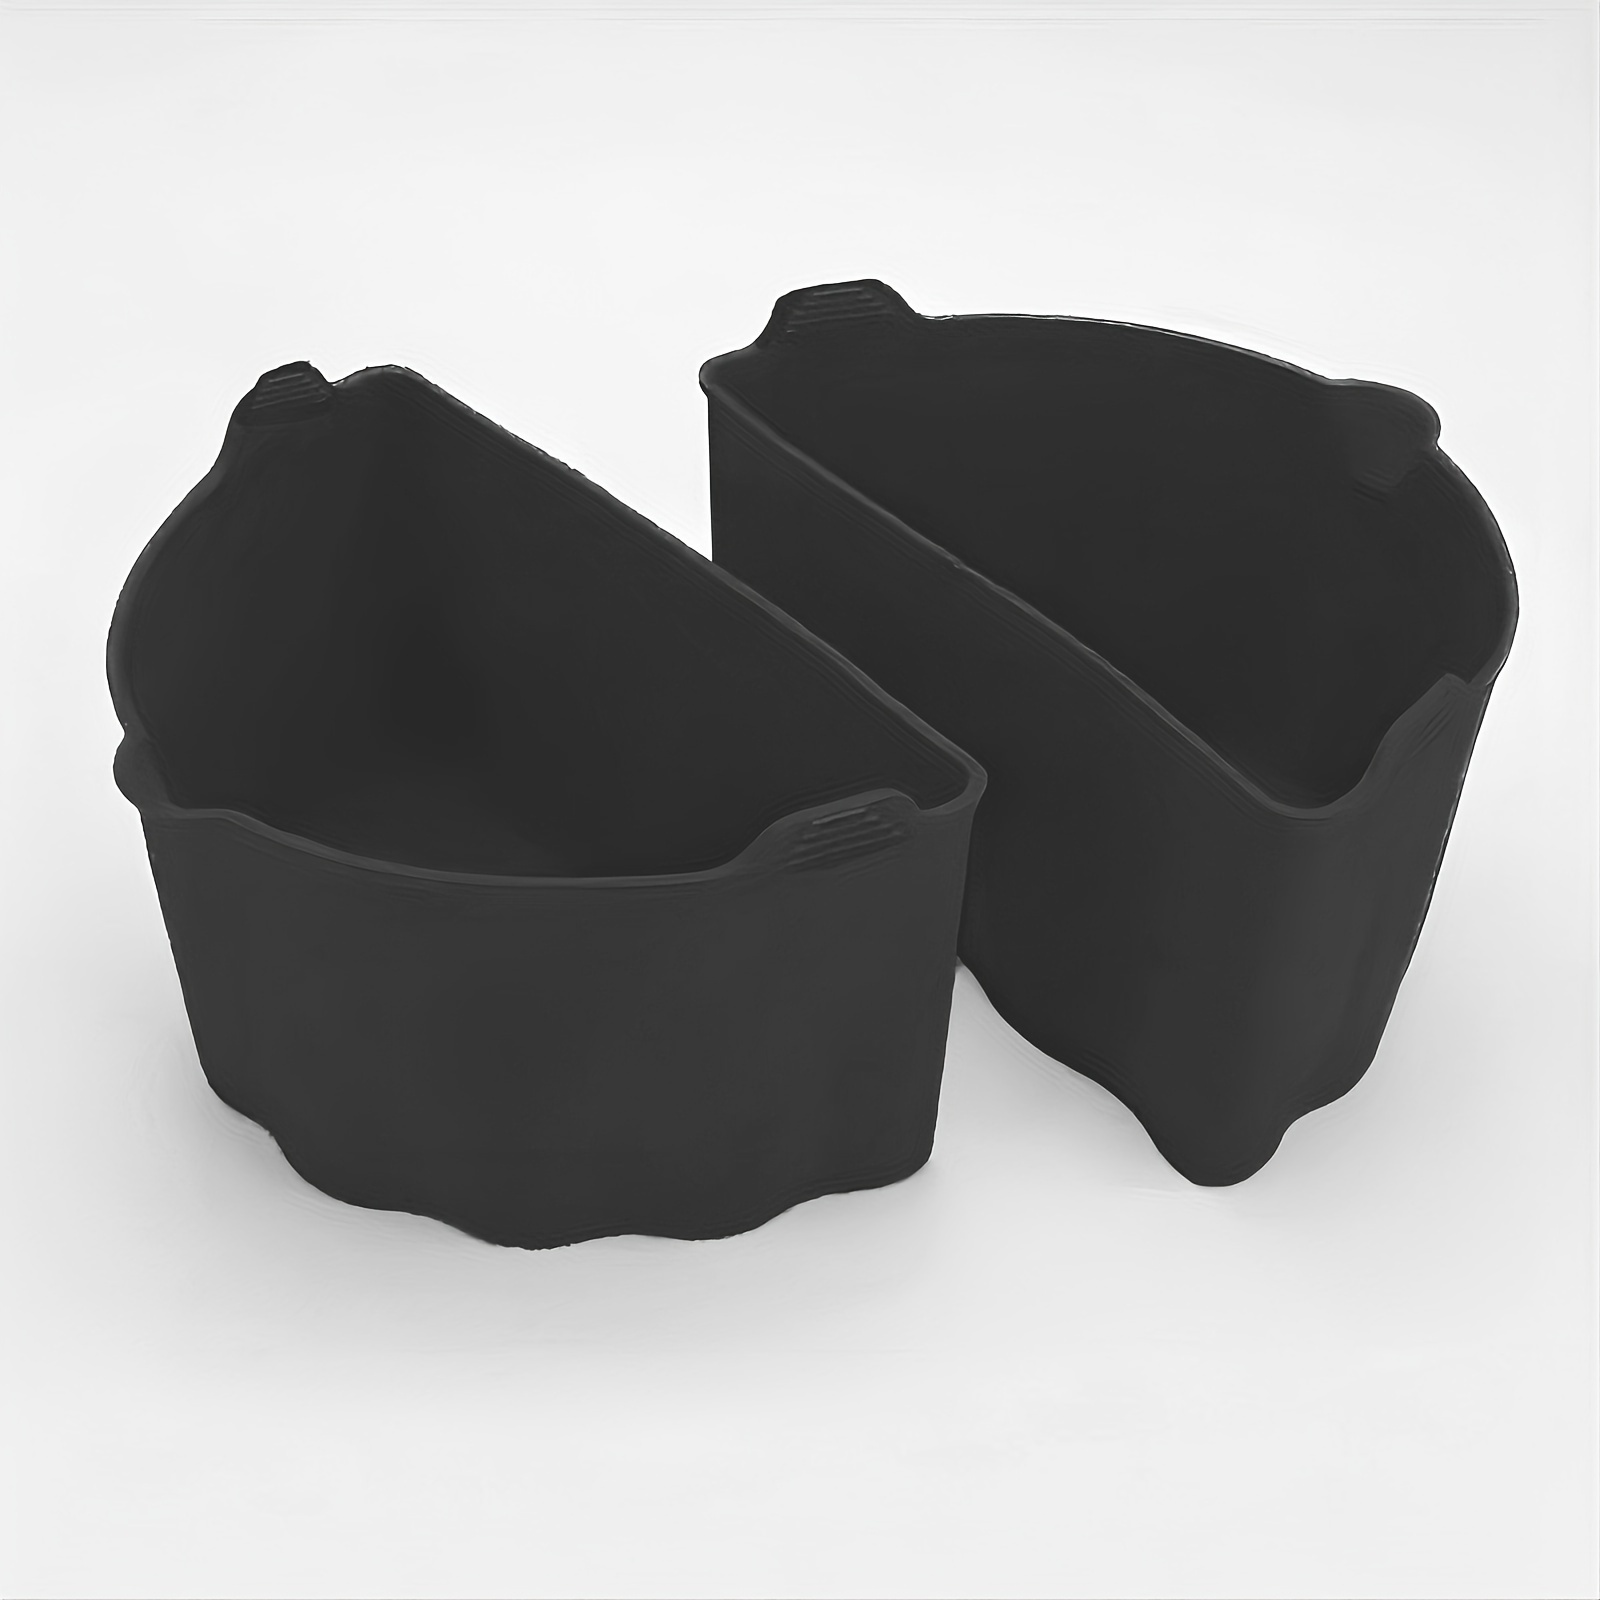 SCD02B Slow Cooker Liners Divider, Black – Syntus